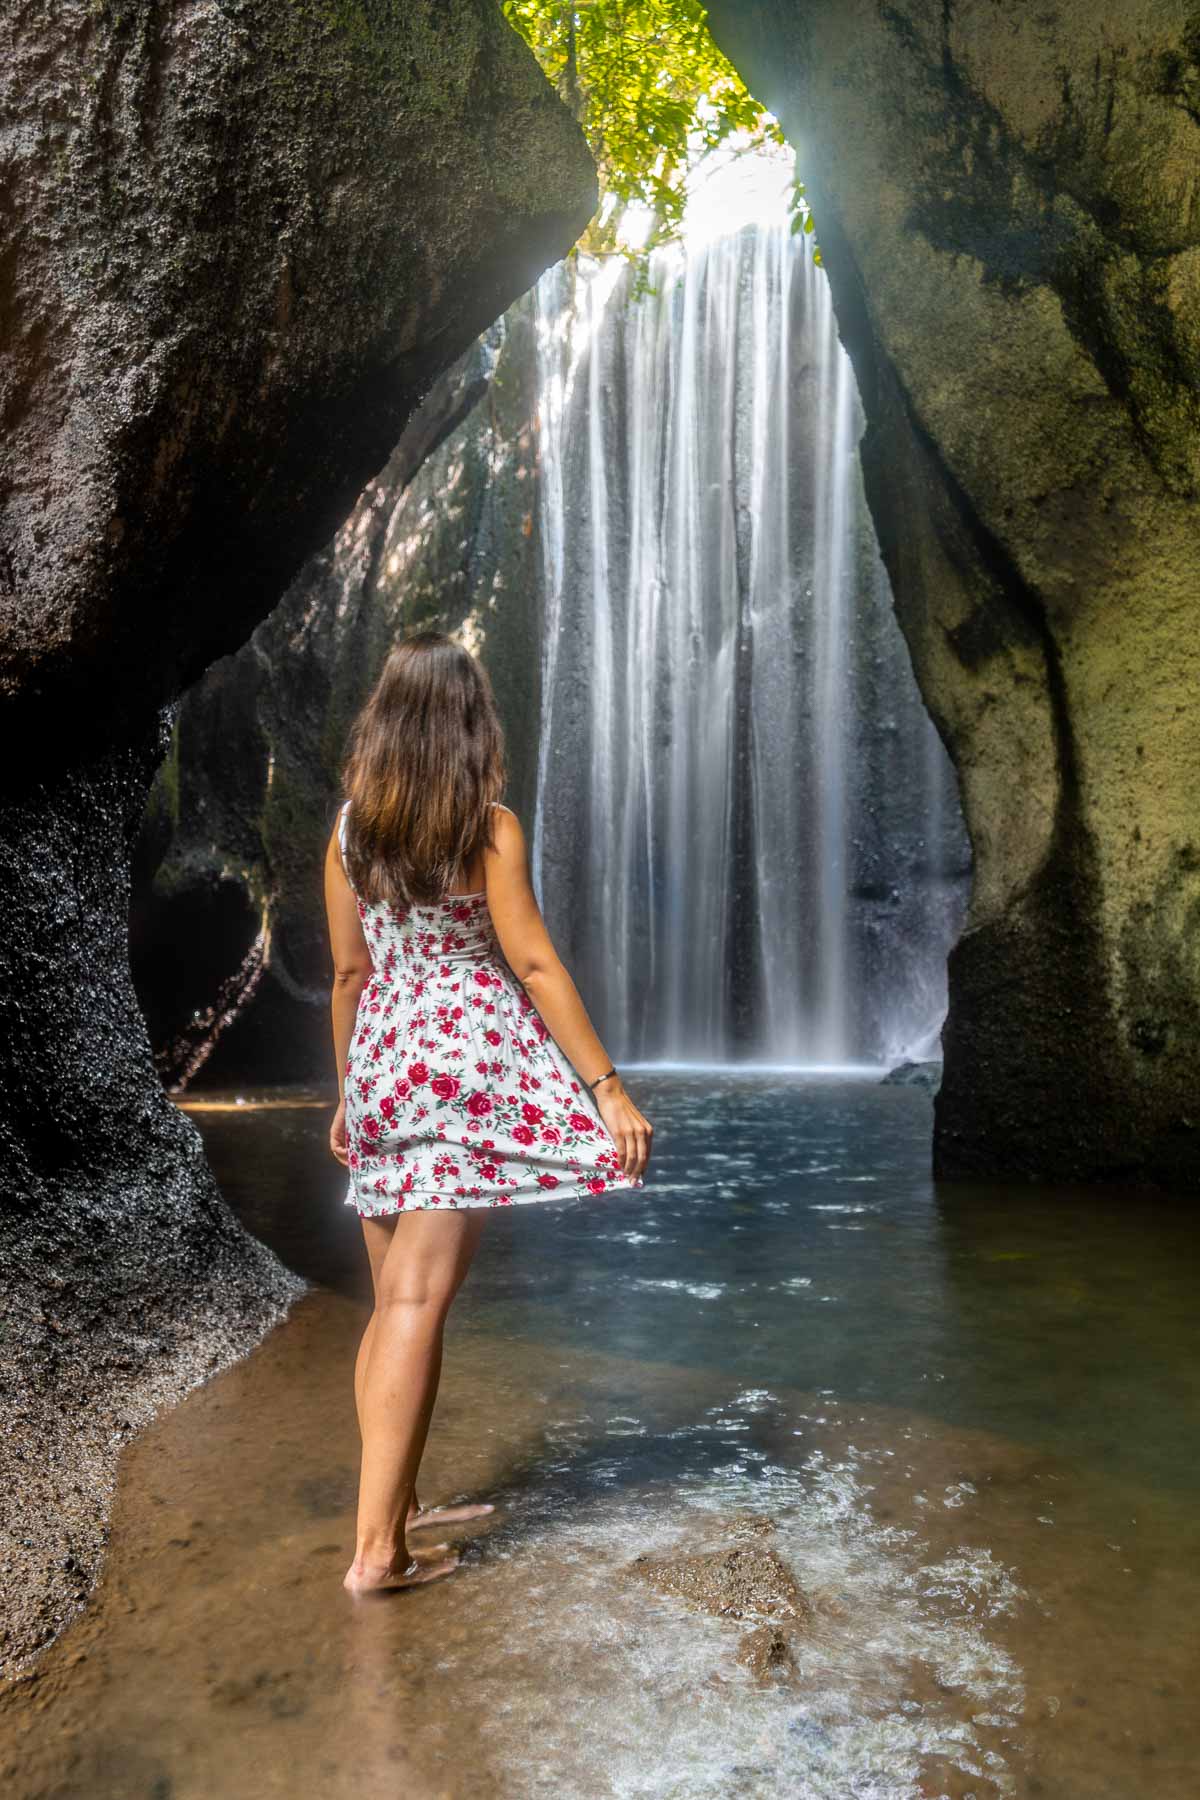 Girl in a red floral dress standing in front of Tukad Cepung Waterfall in Bali